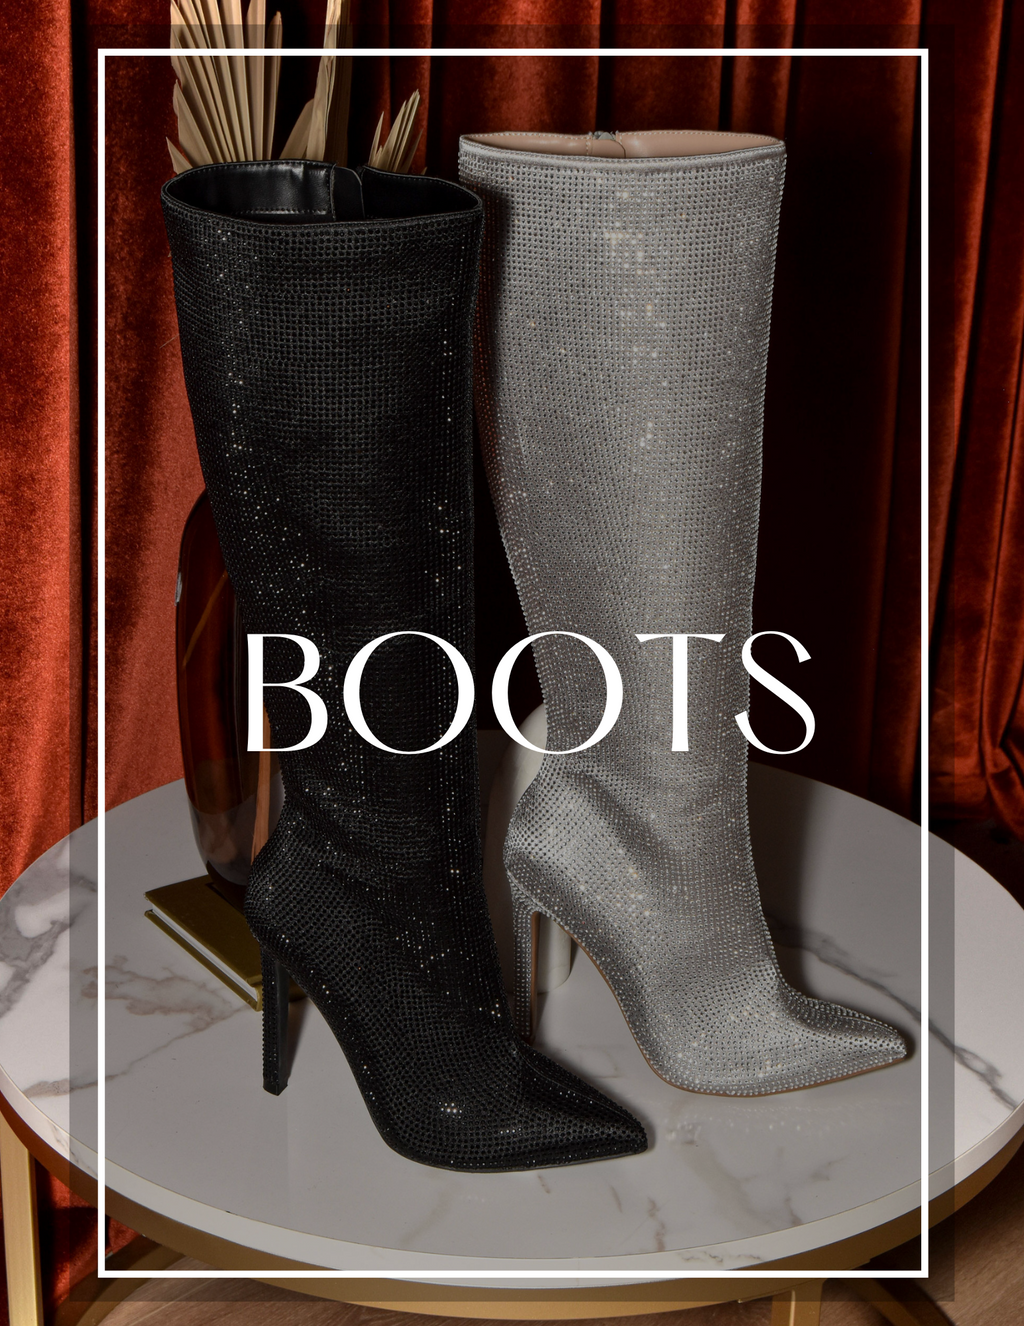 Black and Silver Pointy Toe Tall Boots. Click to shop boots category!